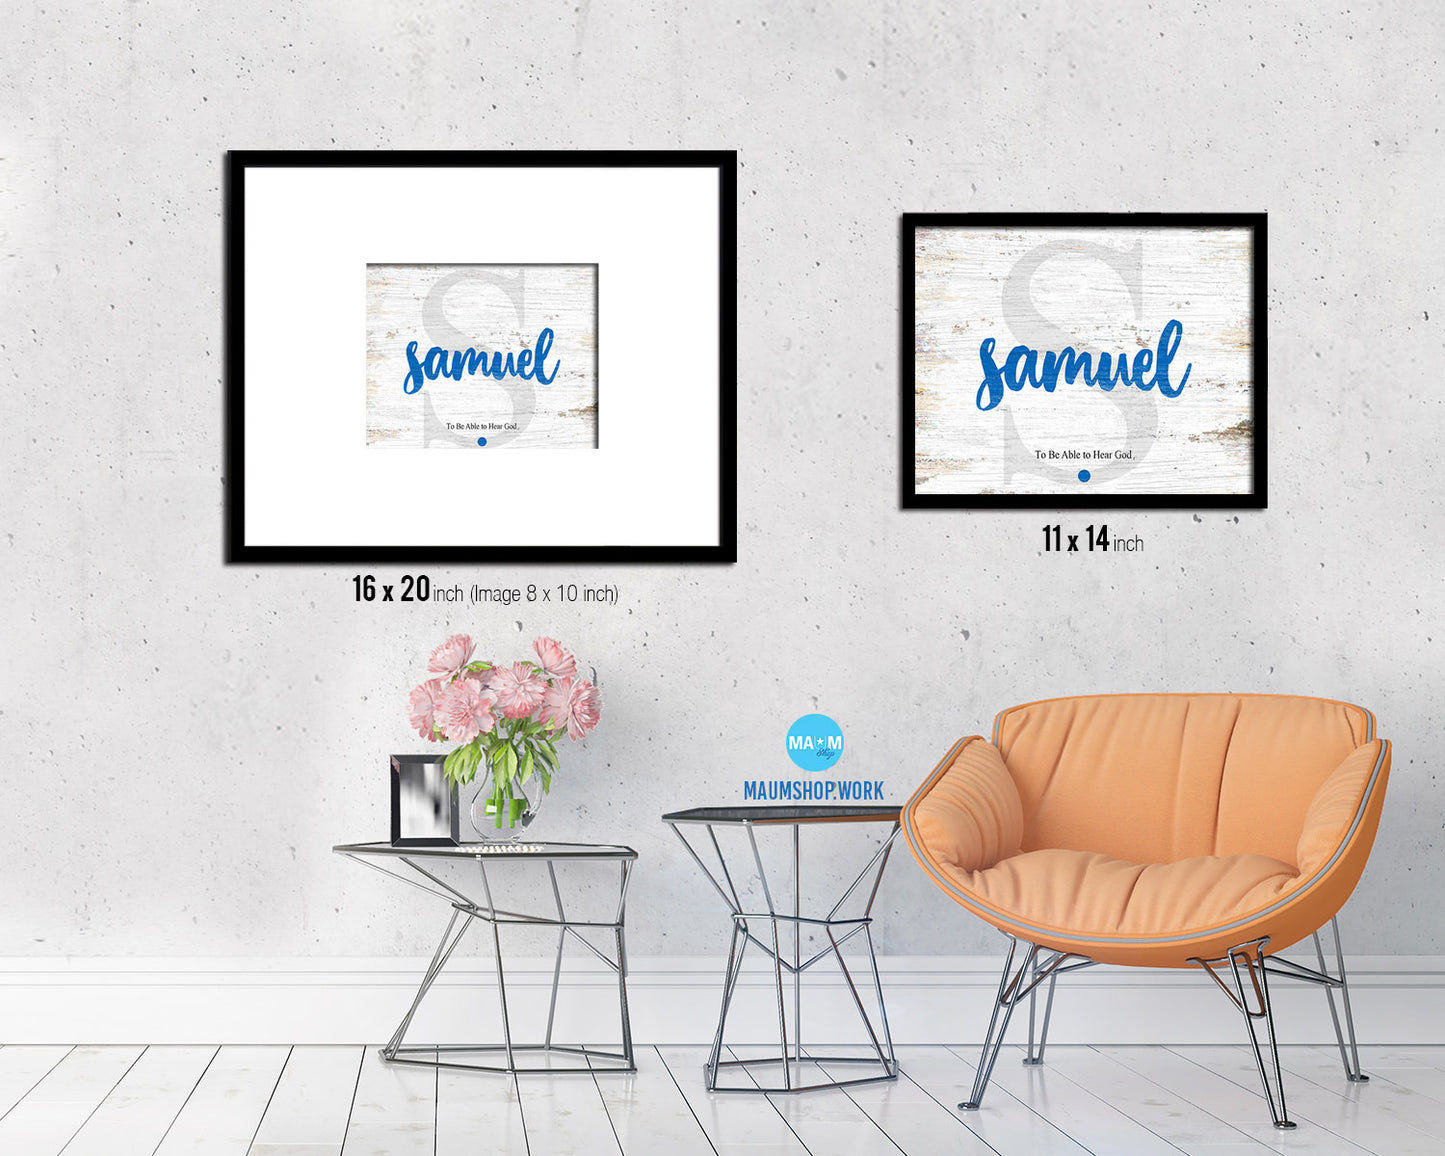 Samuel Personalized Biblical Name Plate Art Framed Print Kids Baby Room Wall Decor Gifts